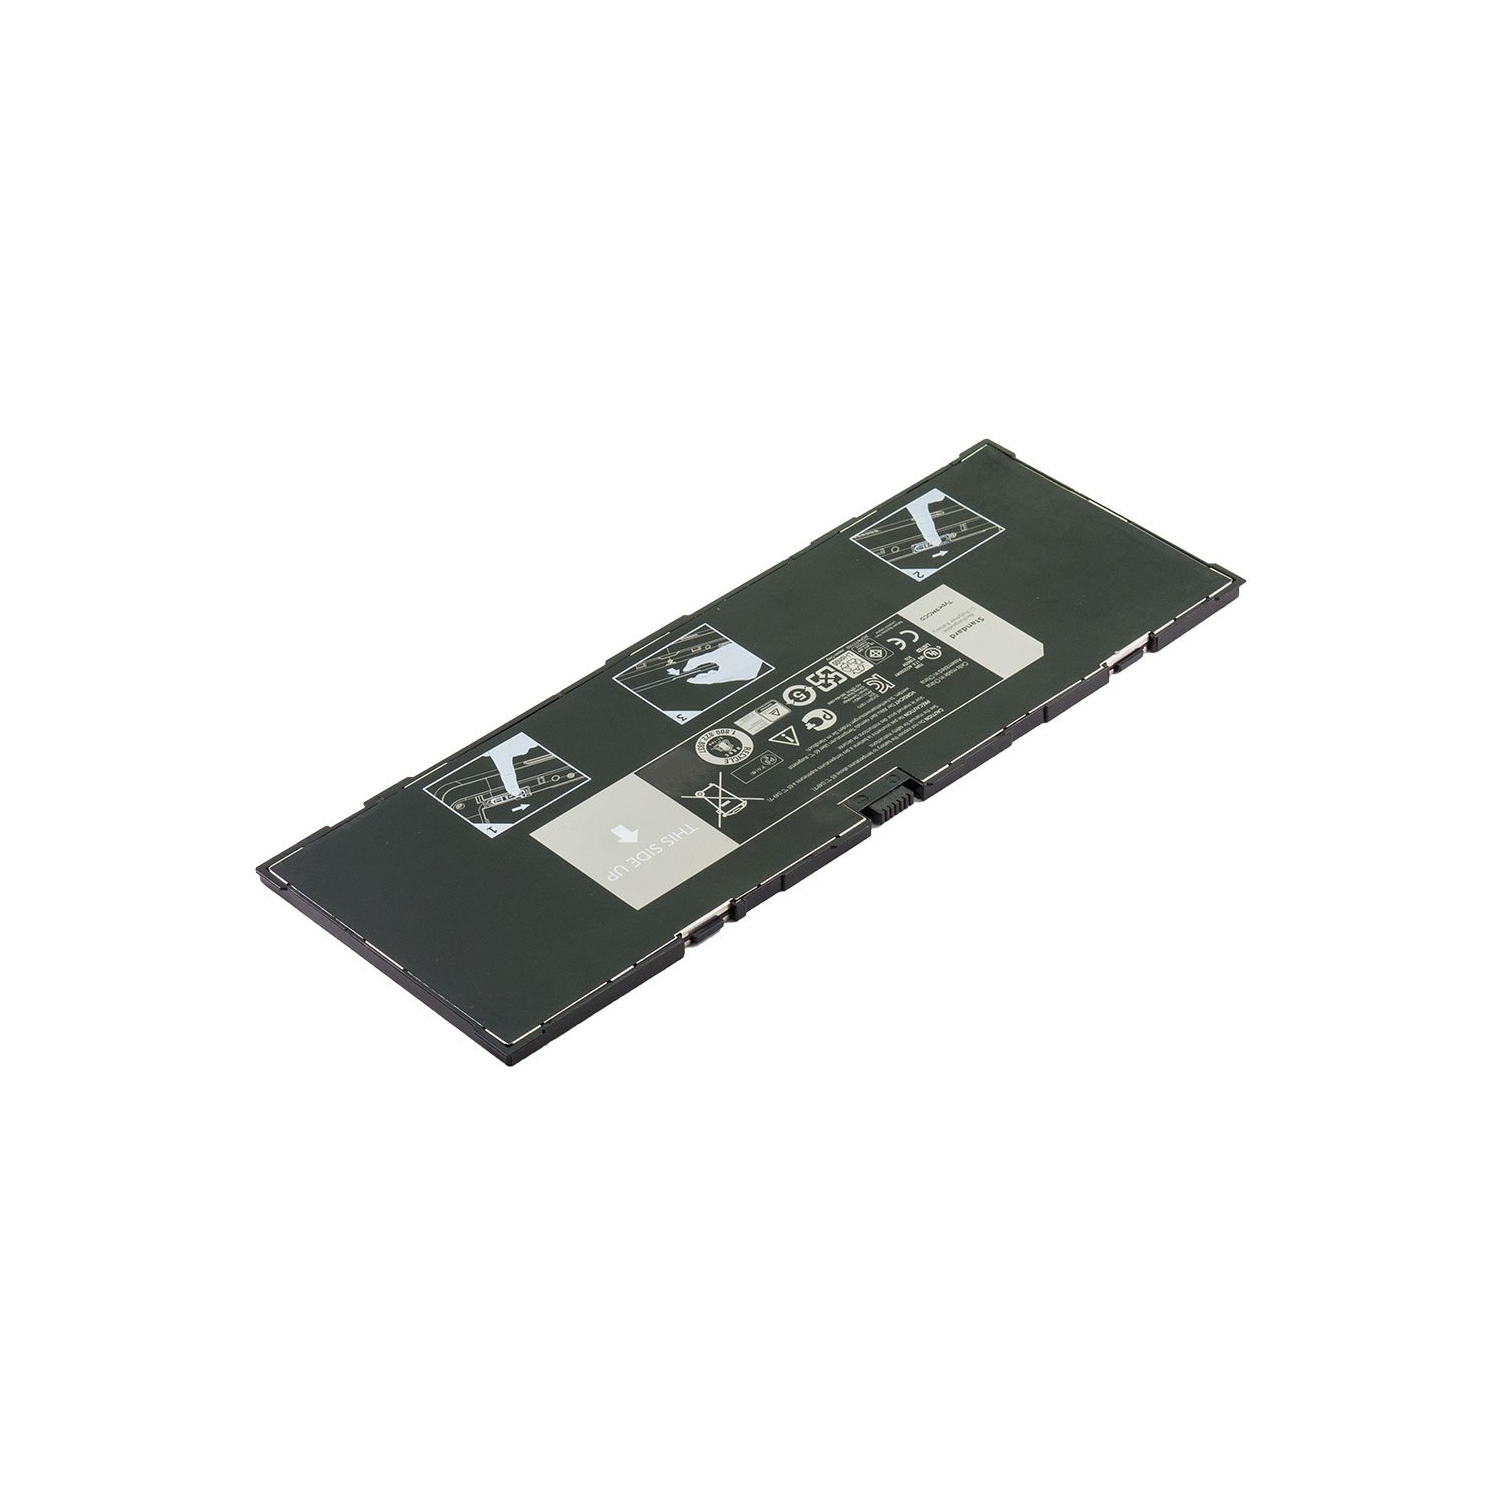 Laptop Battery Replacement for Dell Venue 11 Pro 5130-9356, Venue 11 Pro T06G, 312-1453, 9MGCD, VYP88, XMFY3